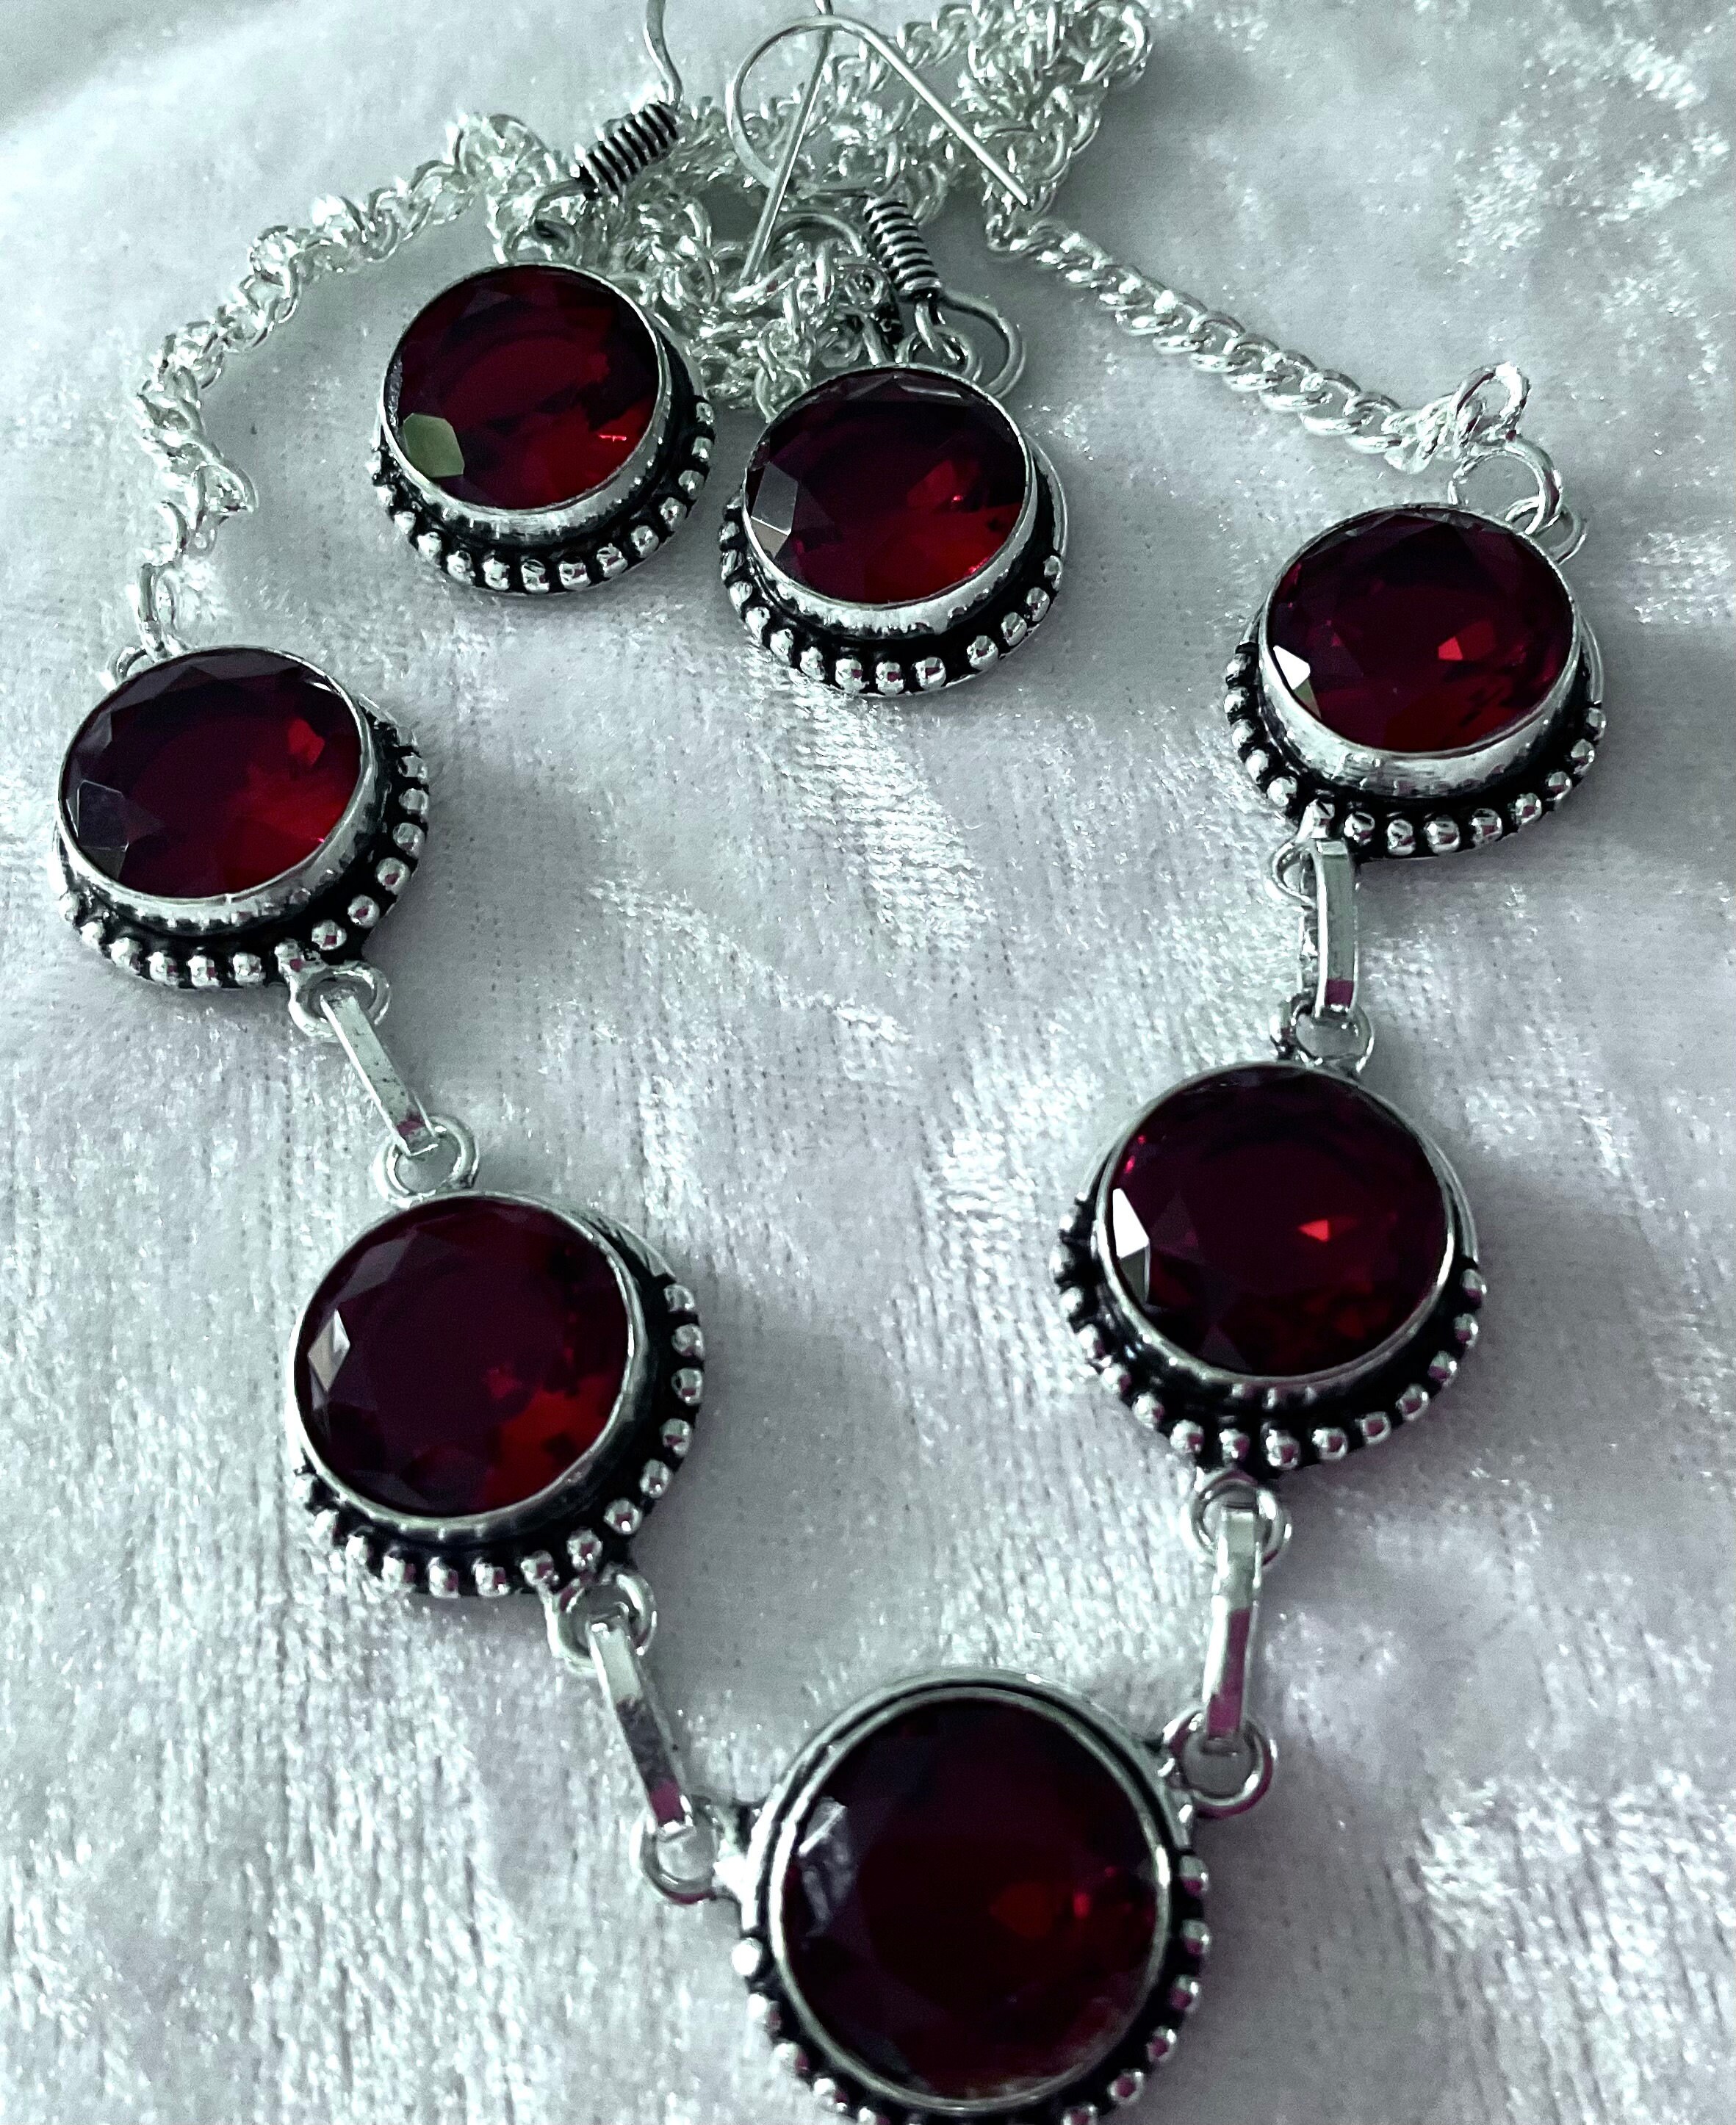 Vampire Fangs Necklace with Blood Drop — Bang-Up Betty